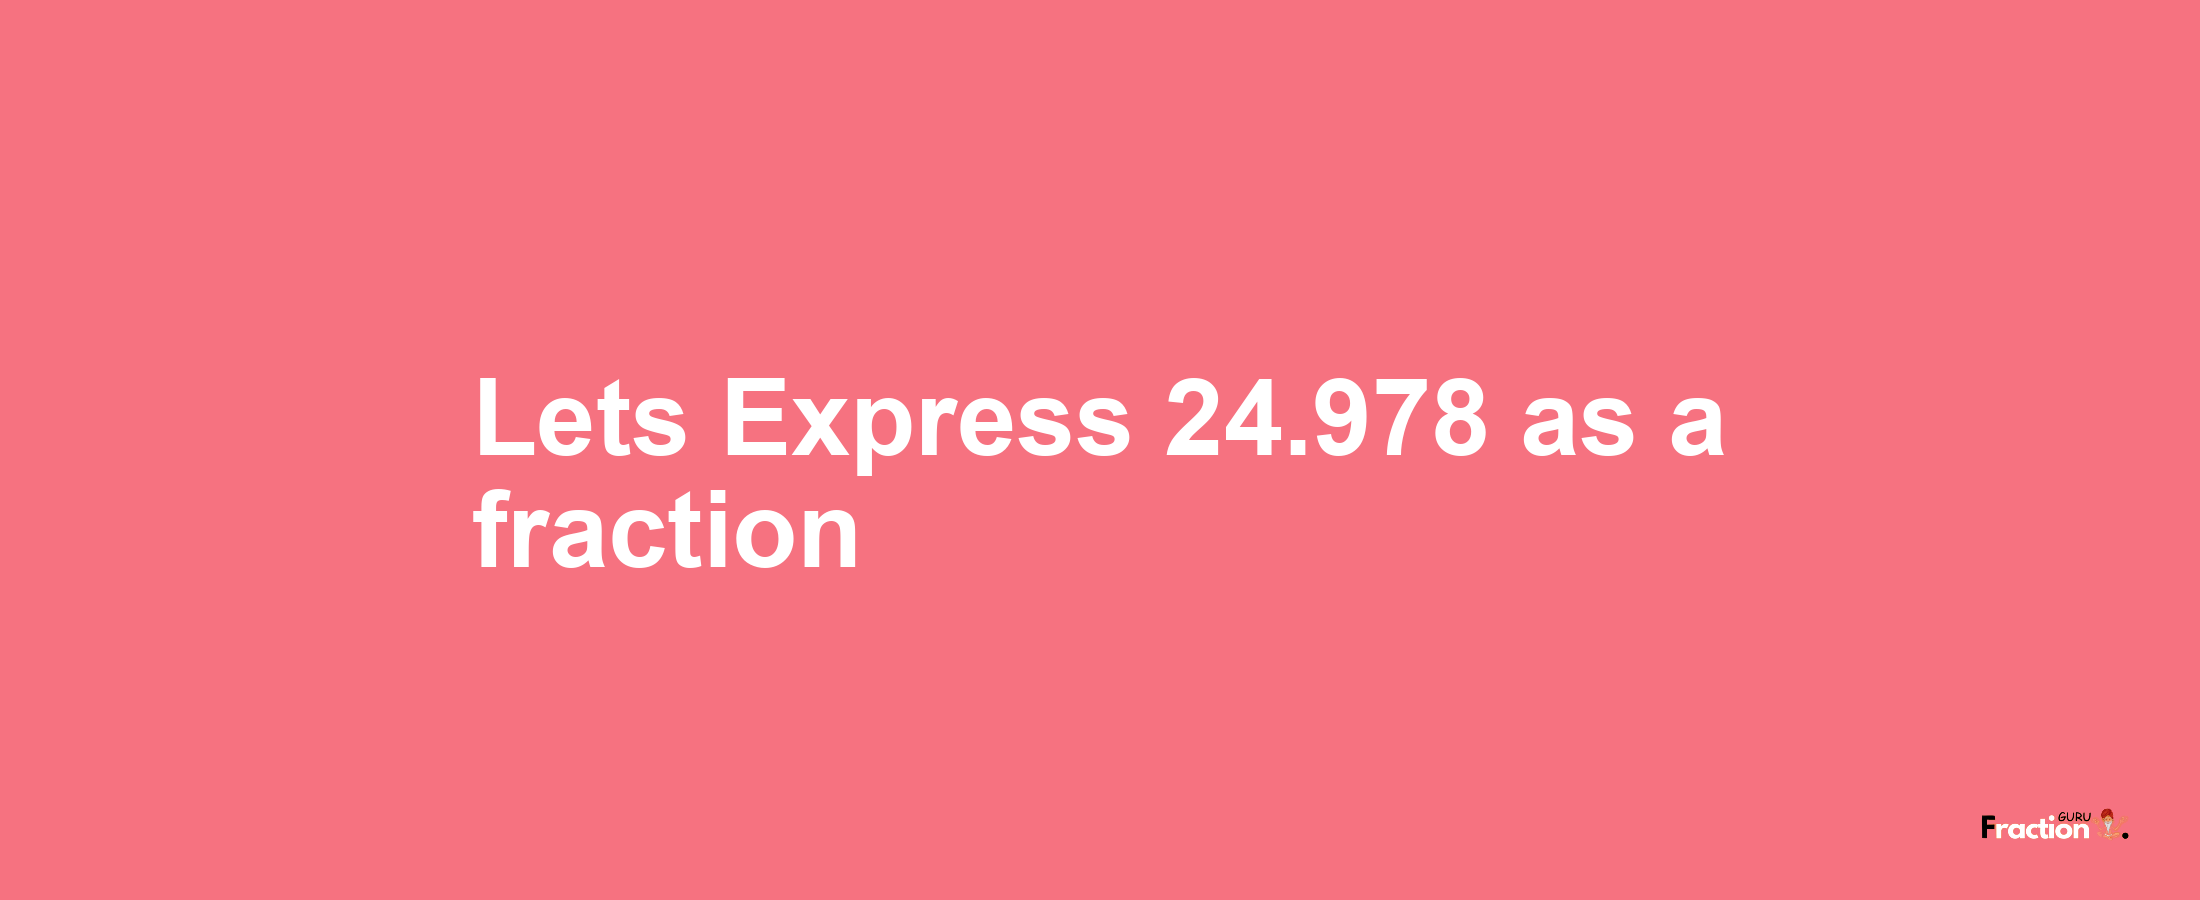 Lets Express 24.978 as afraction